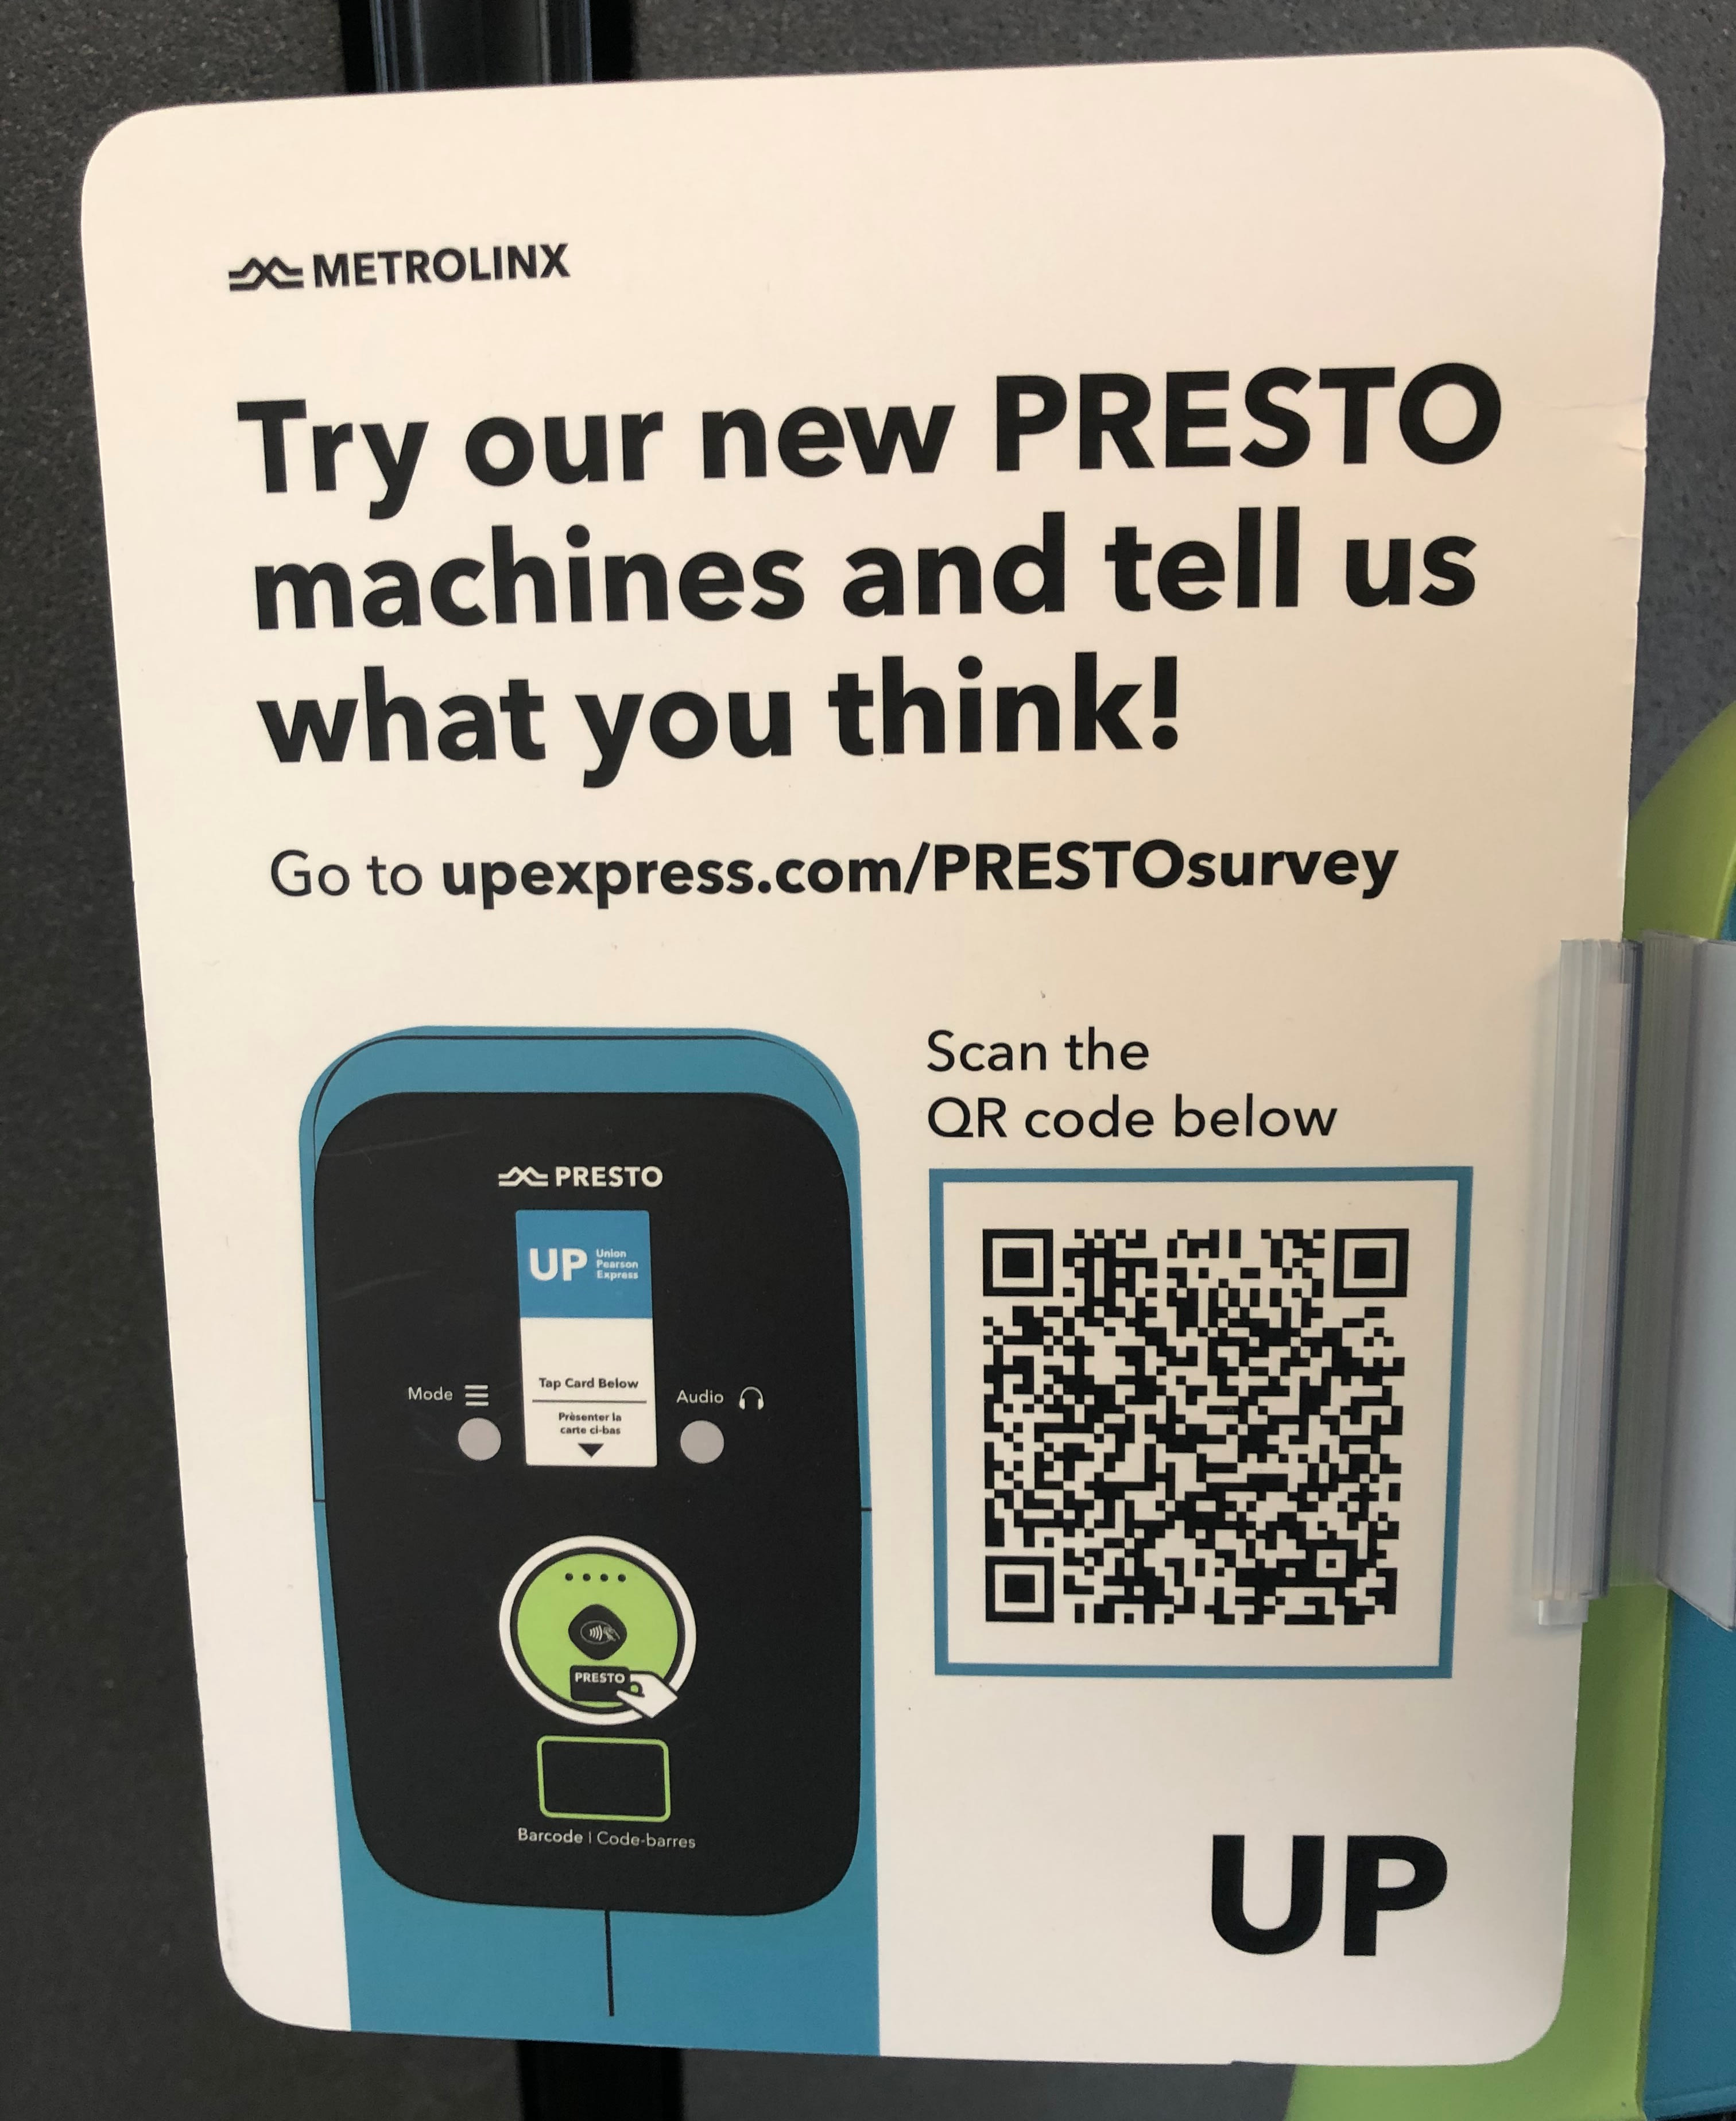 Closer look at the signs that are attached to the PRESTO devices